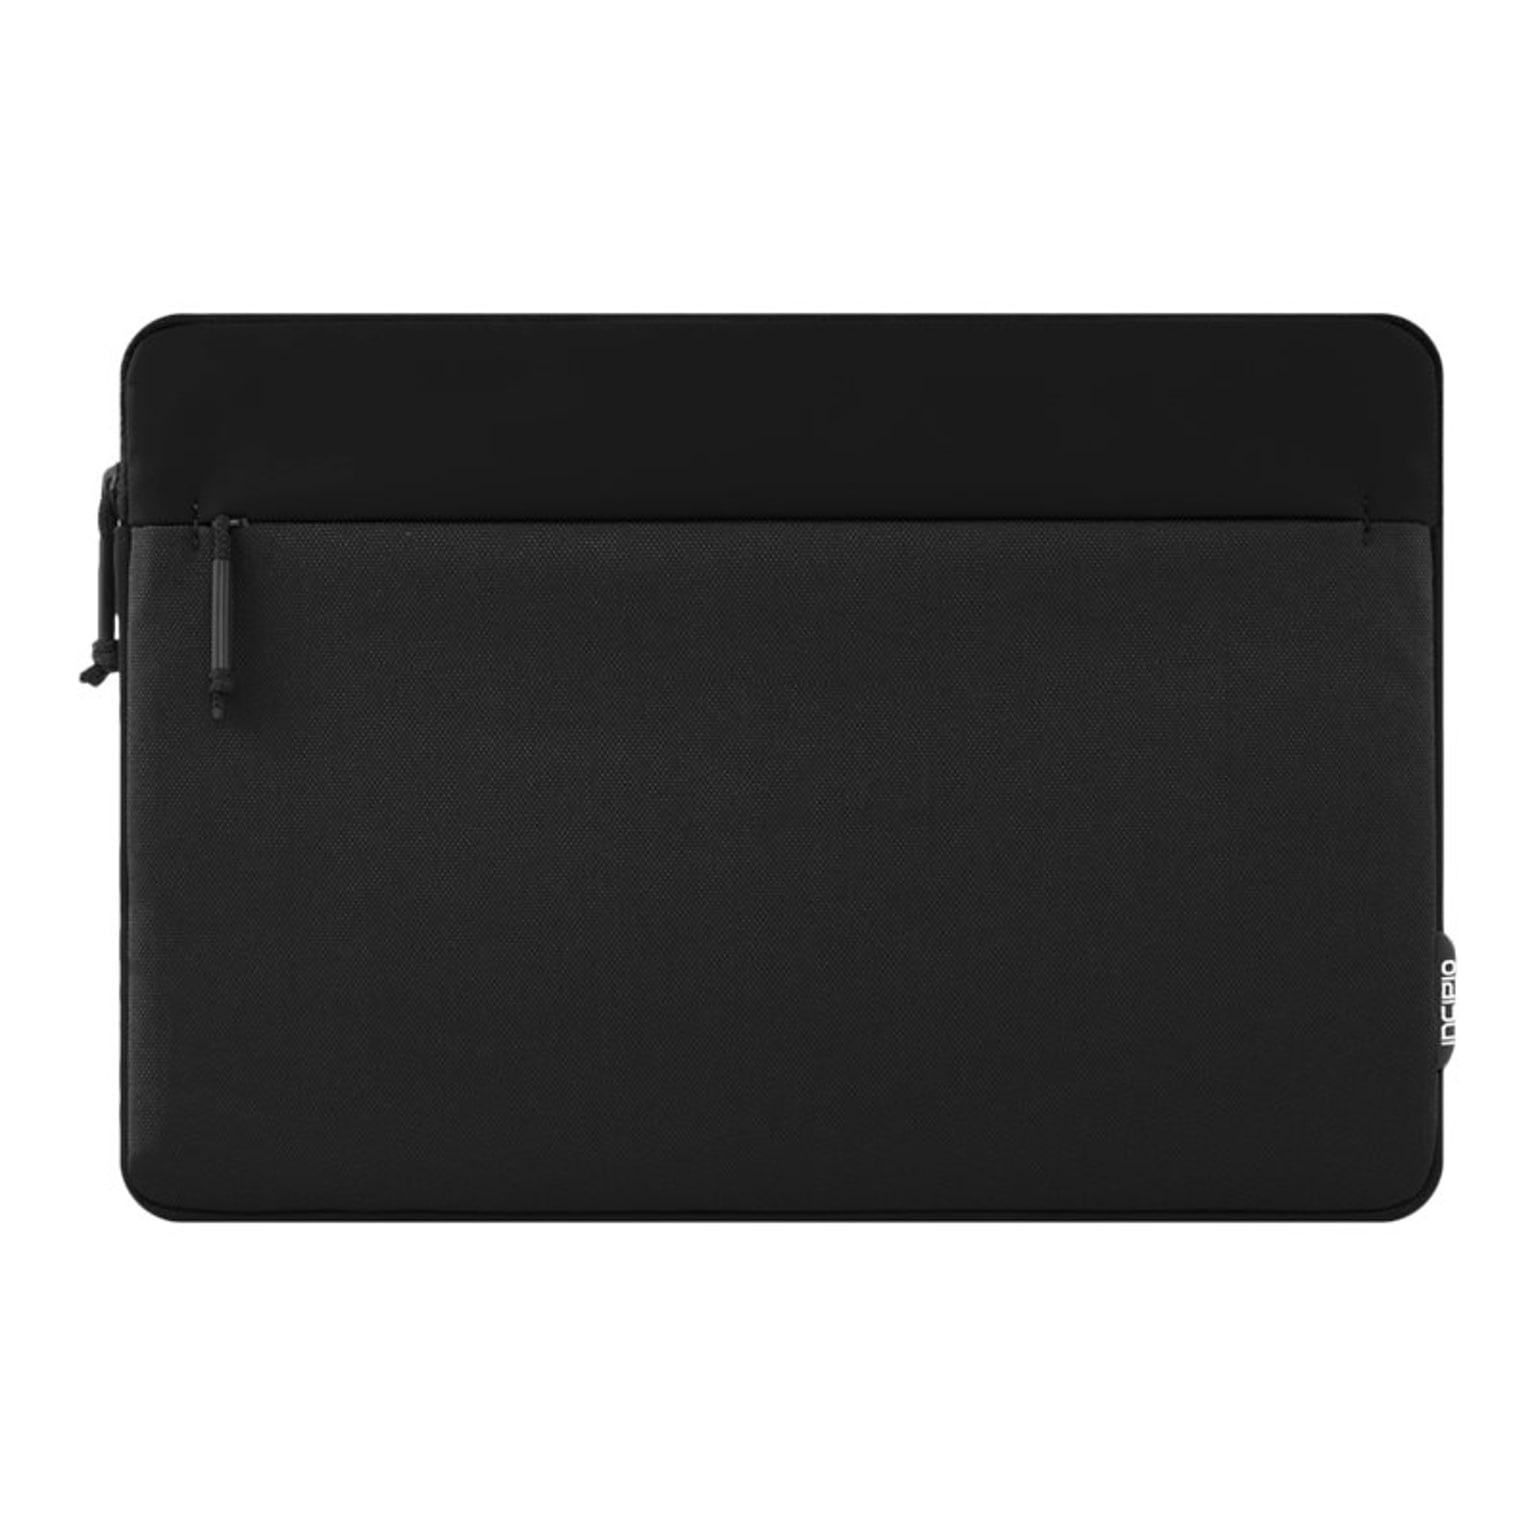 Incipio MRSF-095-BLK Truman™ Nylon/Leather Protective Padded Sleeve for 12.3 Microsoft Surface Pro 4, Black